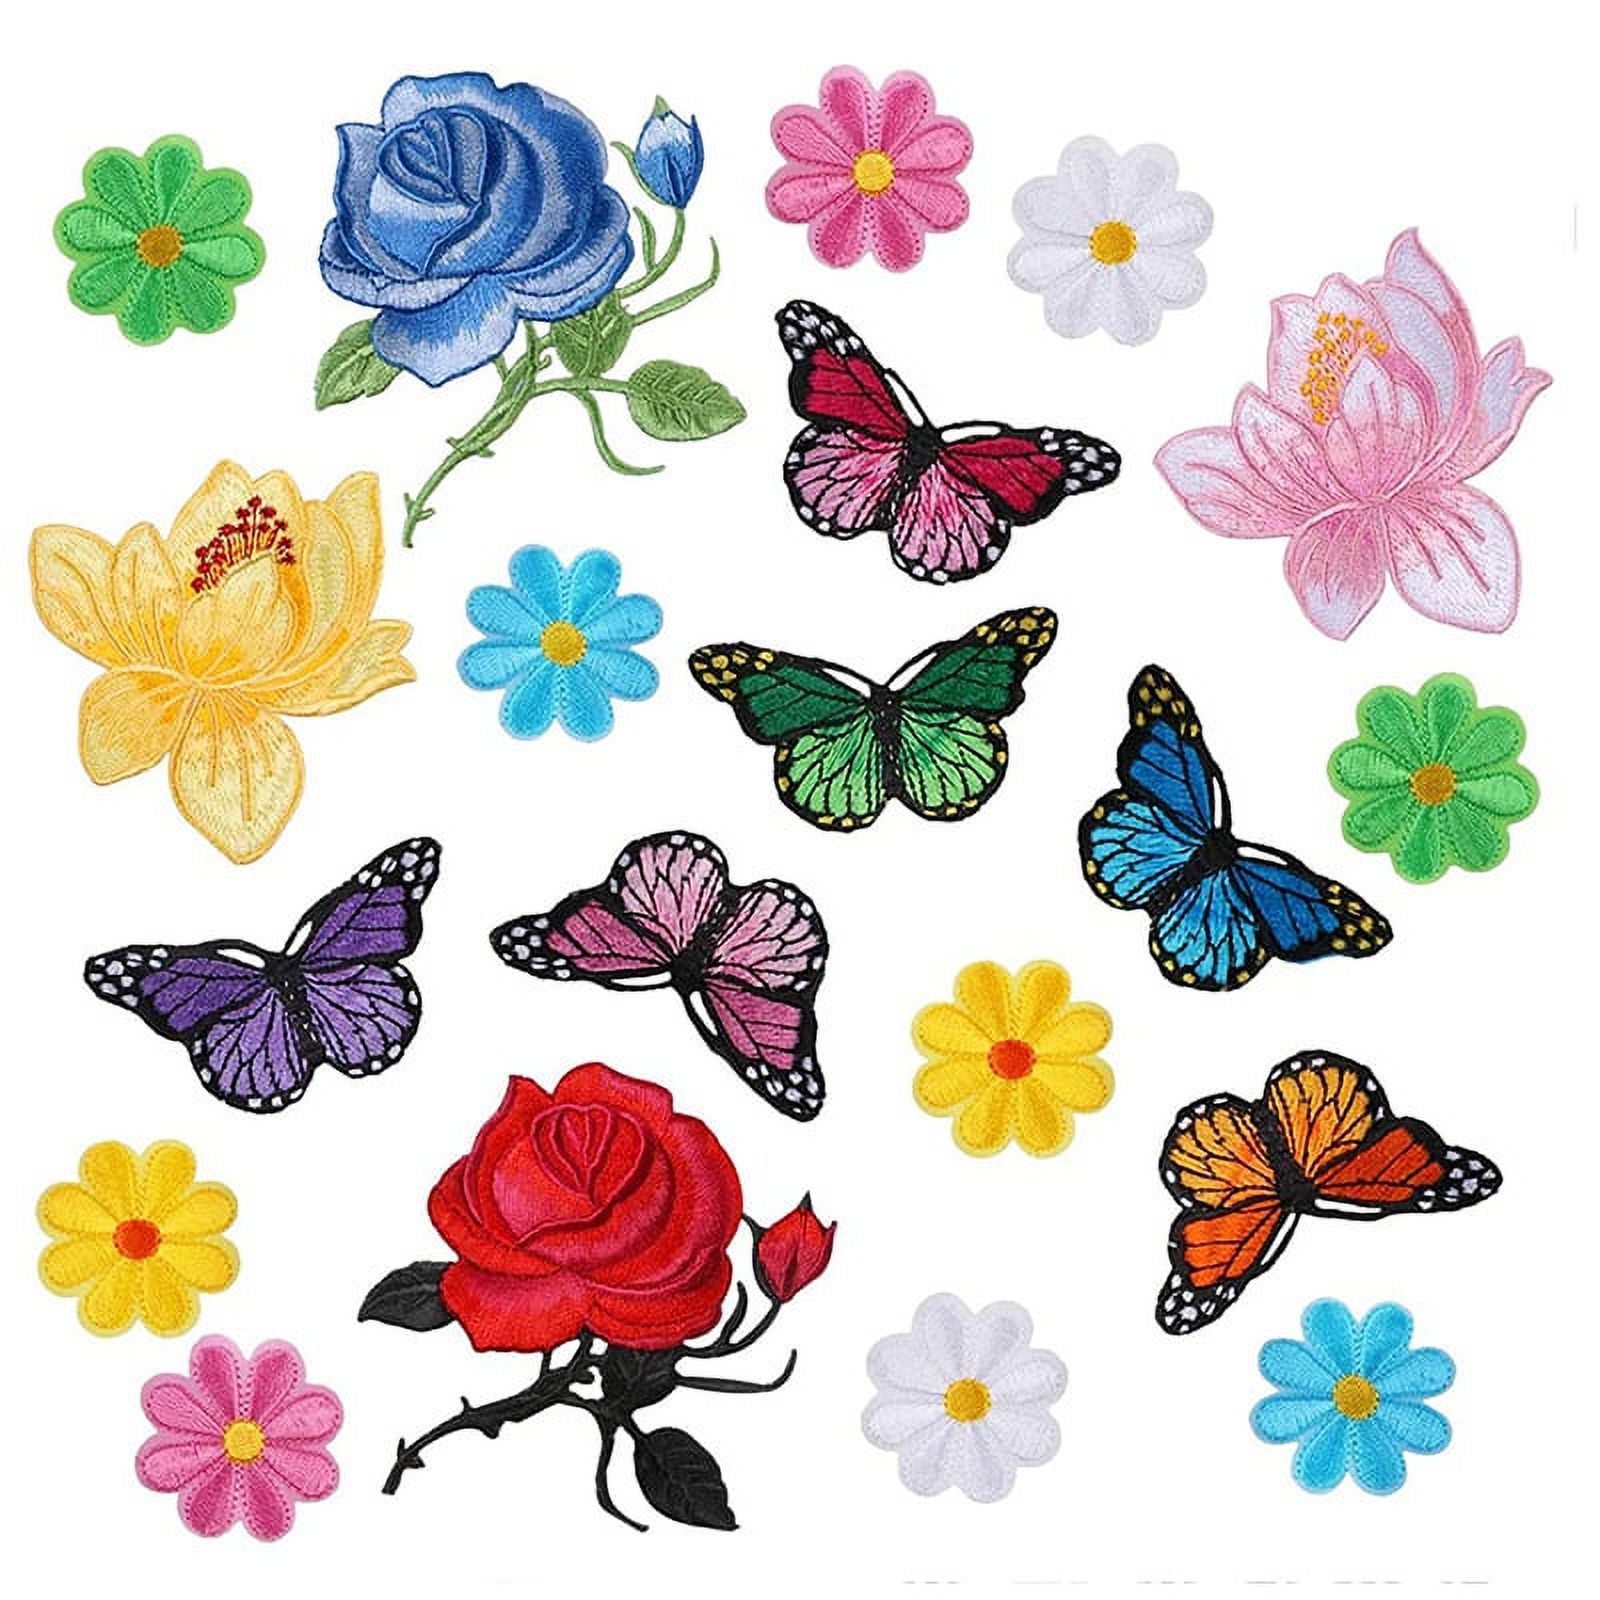 ckepdyeh 20 Pcs Flowers Butterfly Iron on Patches Sew on Embroidery Applique Patches for Arts Crafts DIY Decor,Jeans,Jackets,Bags - image 1 of 8